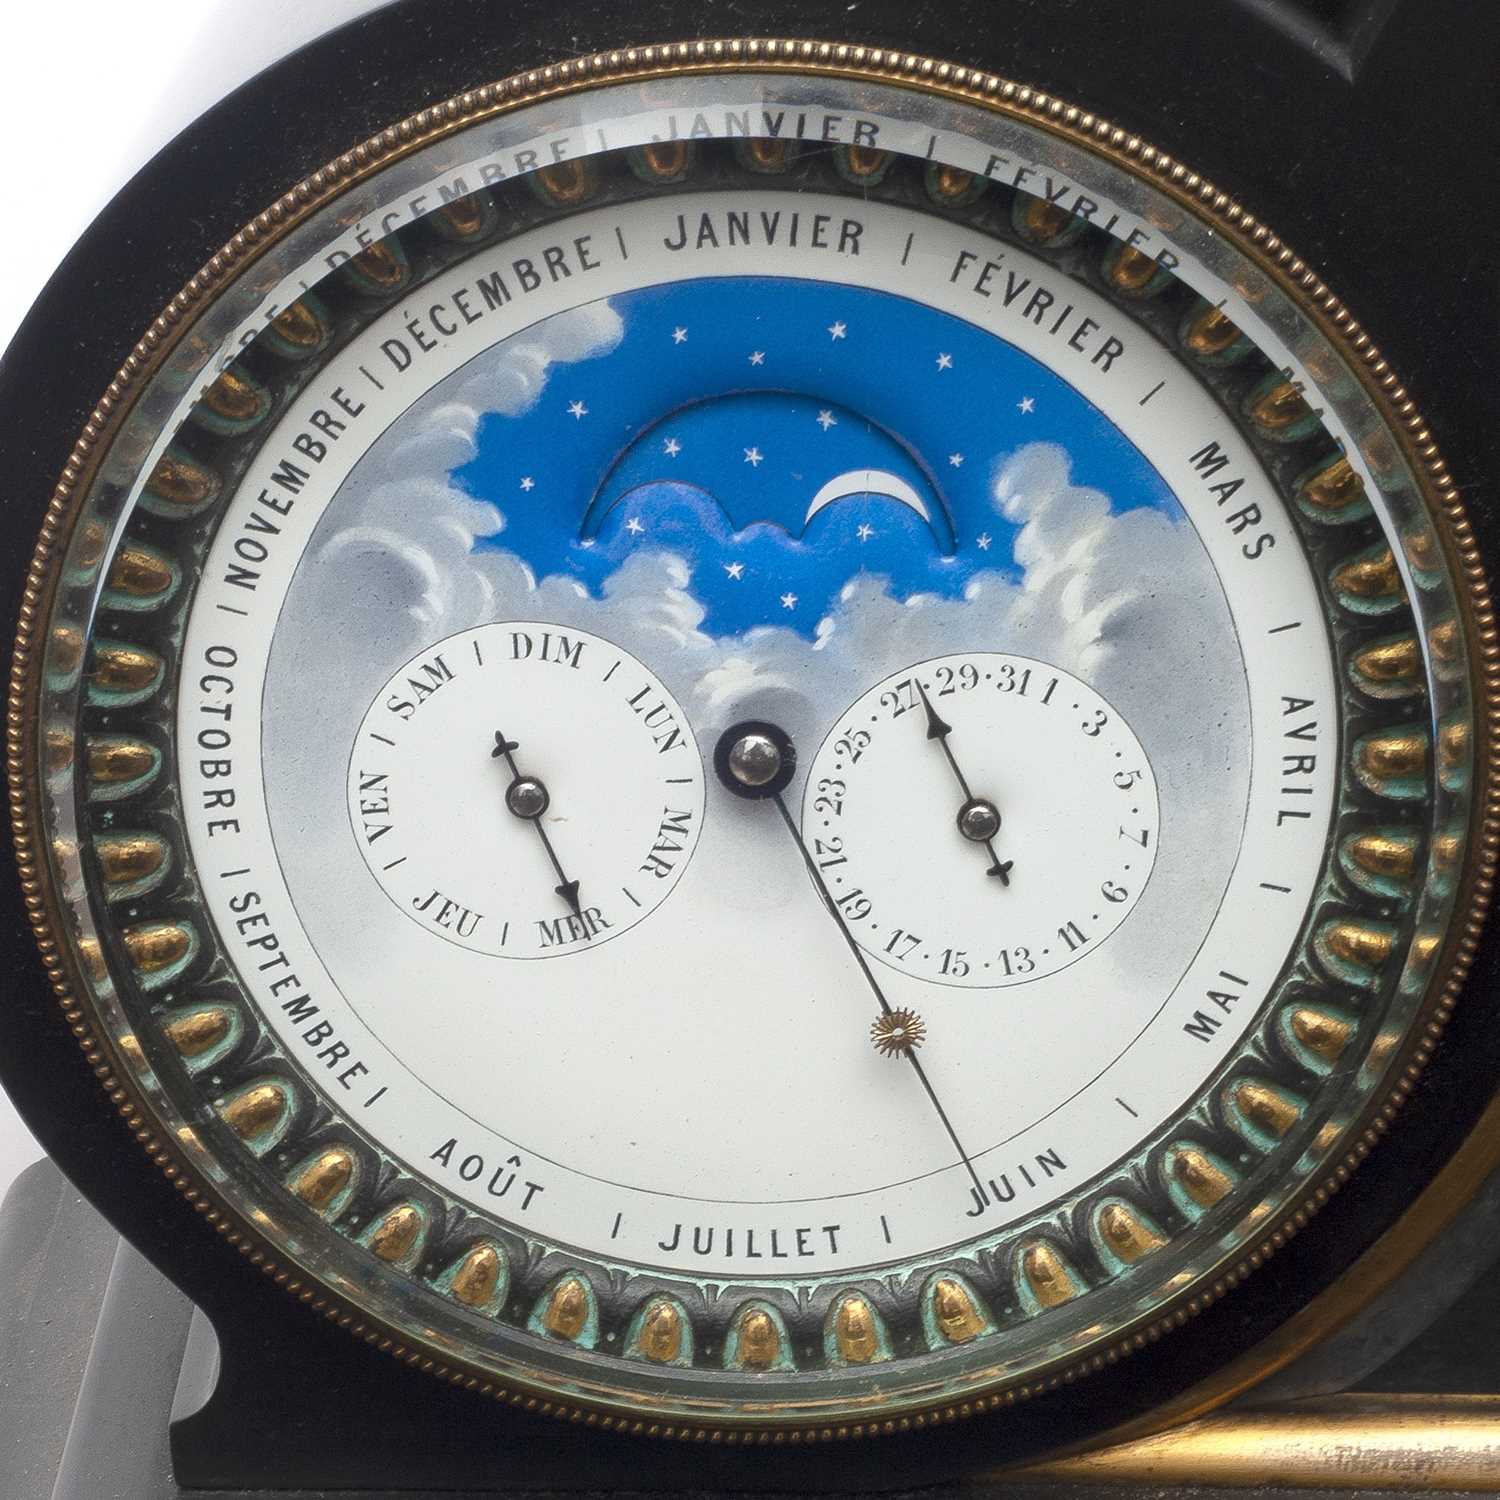 AN IMPRESSIVE 19TH CENTURY FRENCH PERPETUAL CALENDAR CLOCK WITH MOONPHASE AND BAROMETER - Bild 4 aus 6